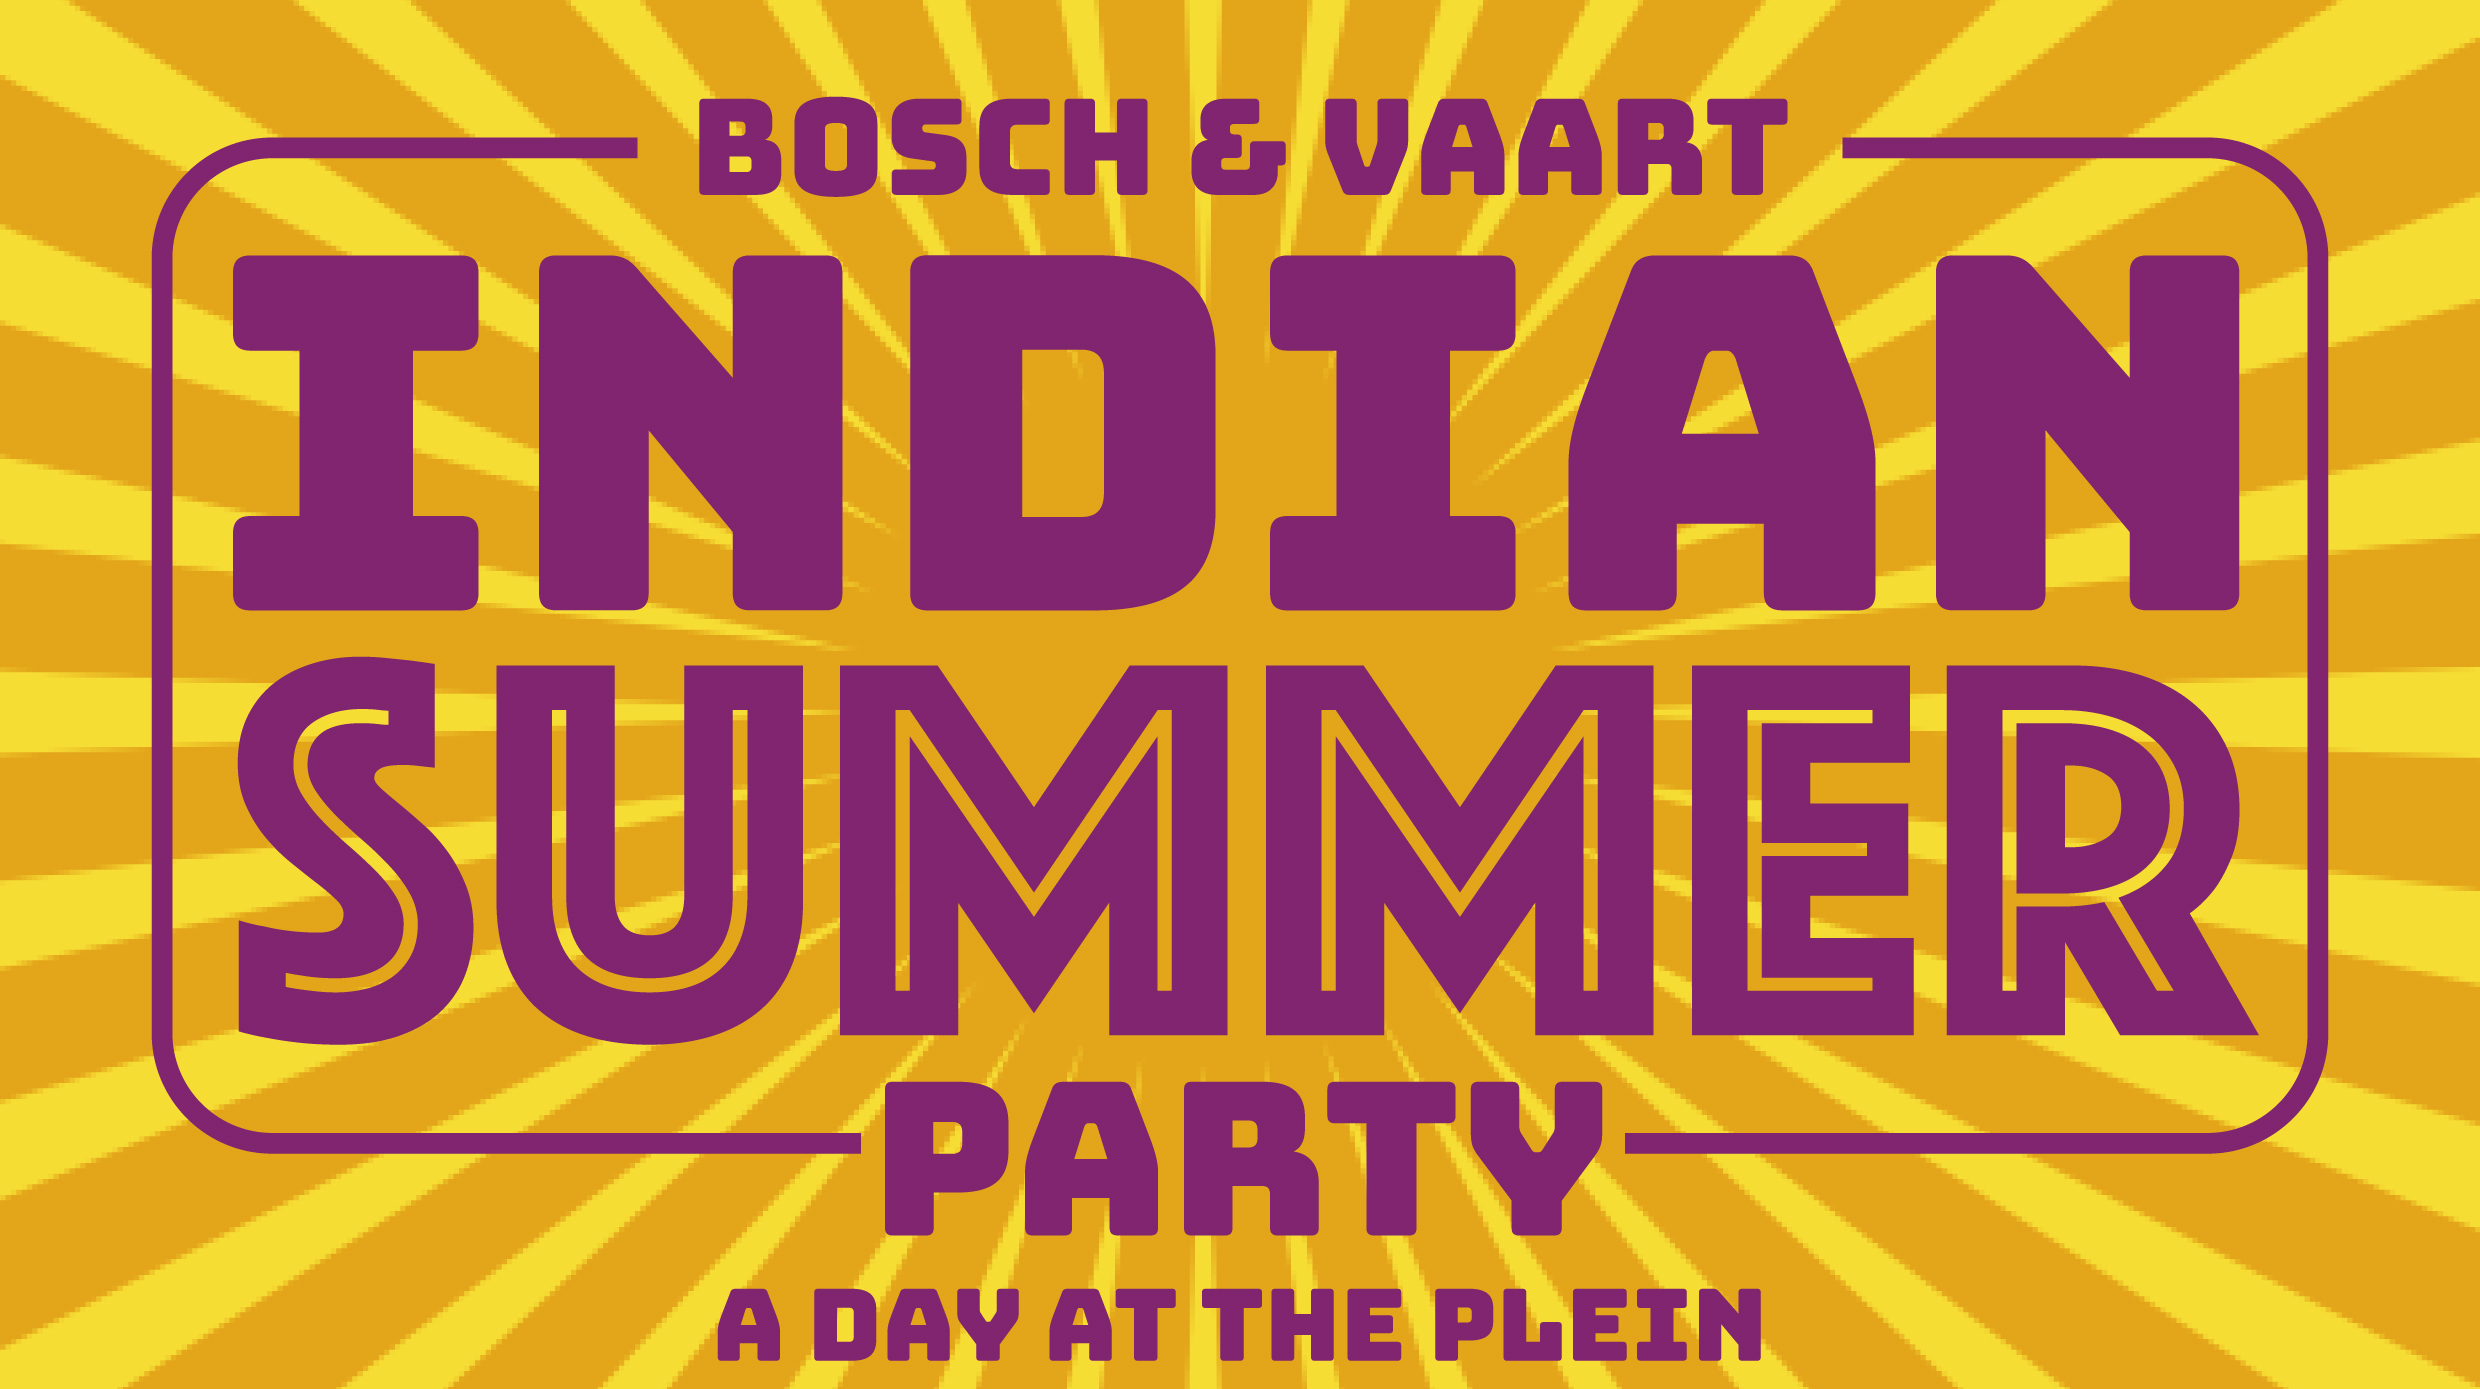 Zaterdag 17 september Indian Summer Party- A Day at the Plein